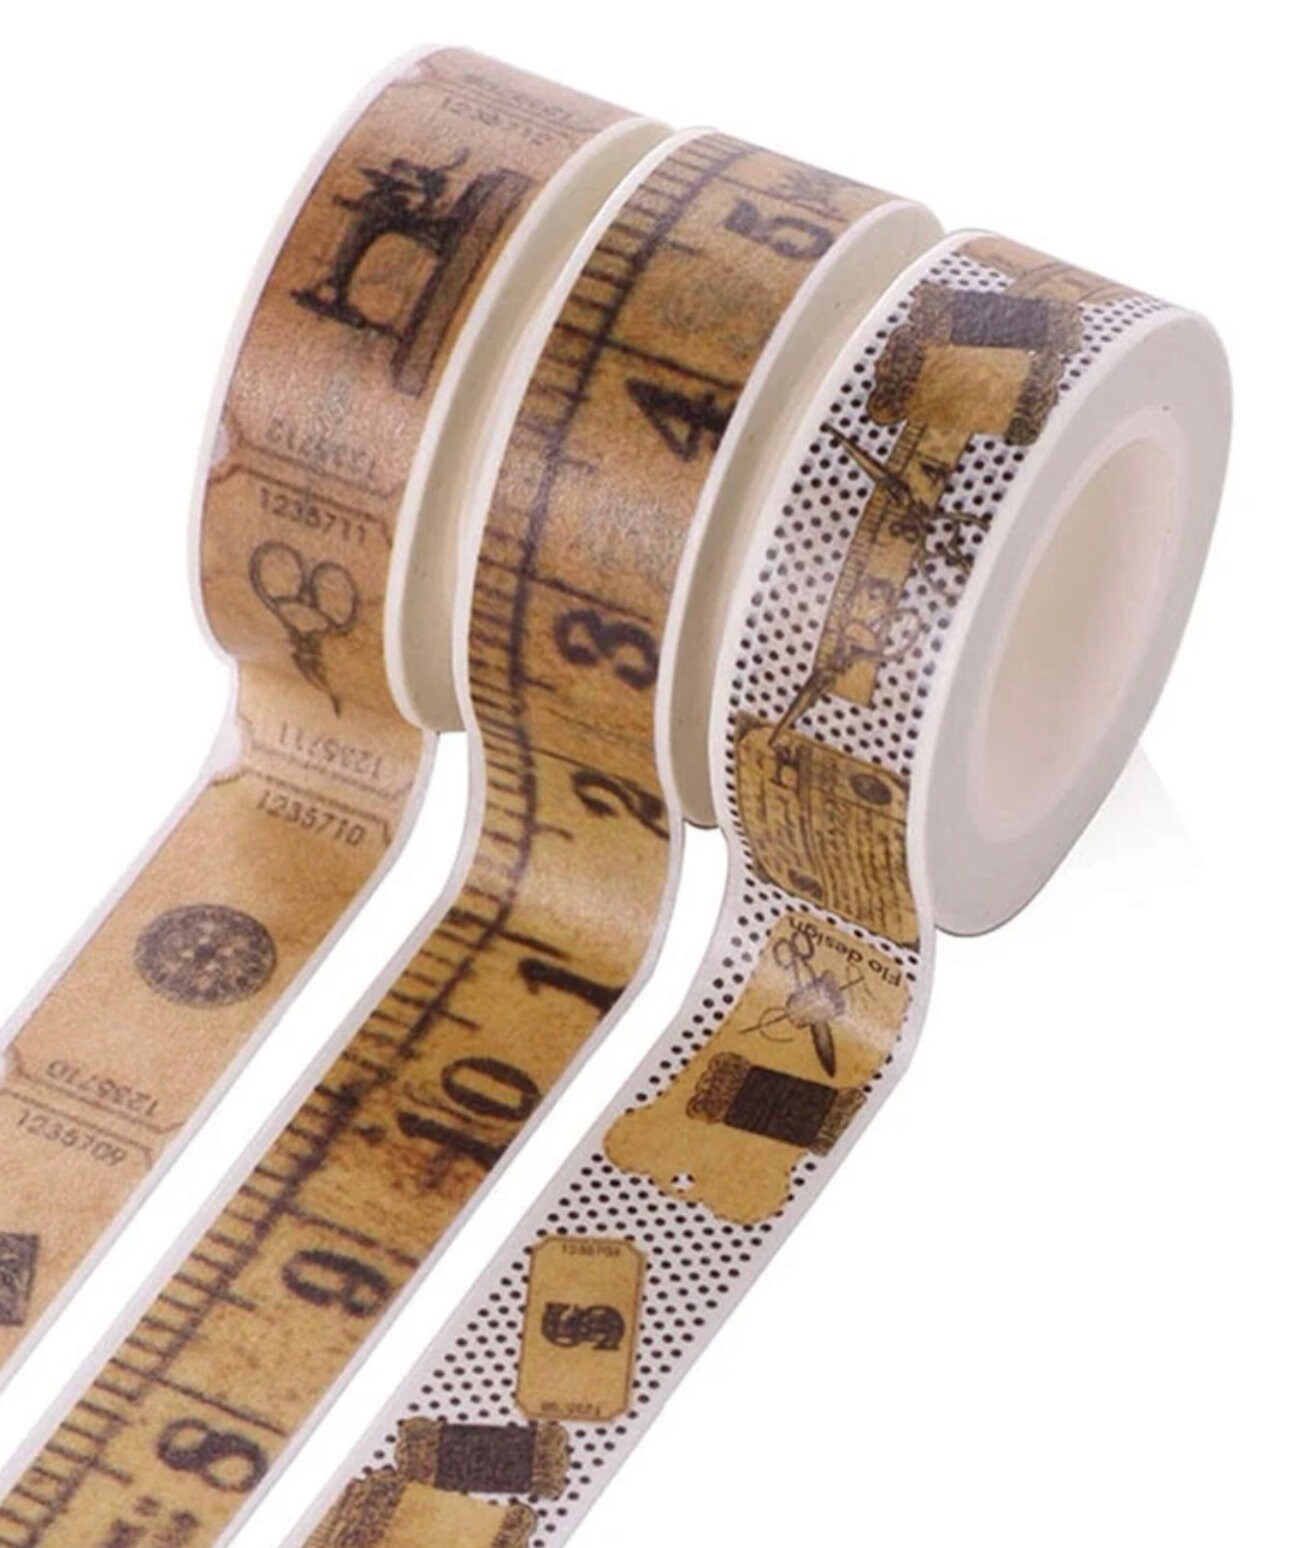 2M2S DST - Double Sided Tape - 50 yard roll - Basting Tape - Bag Making  Supplies